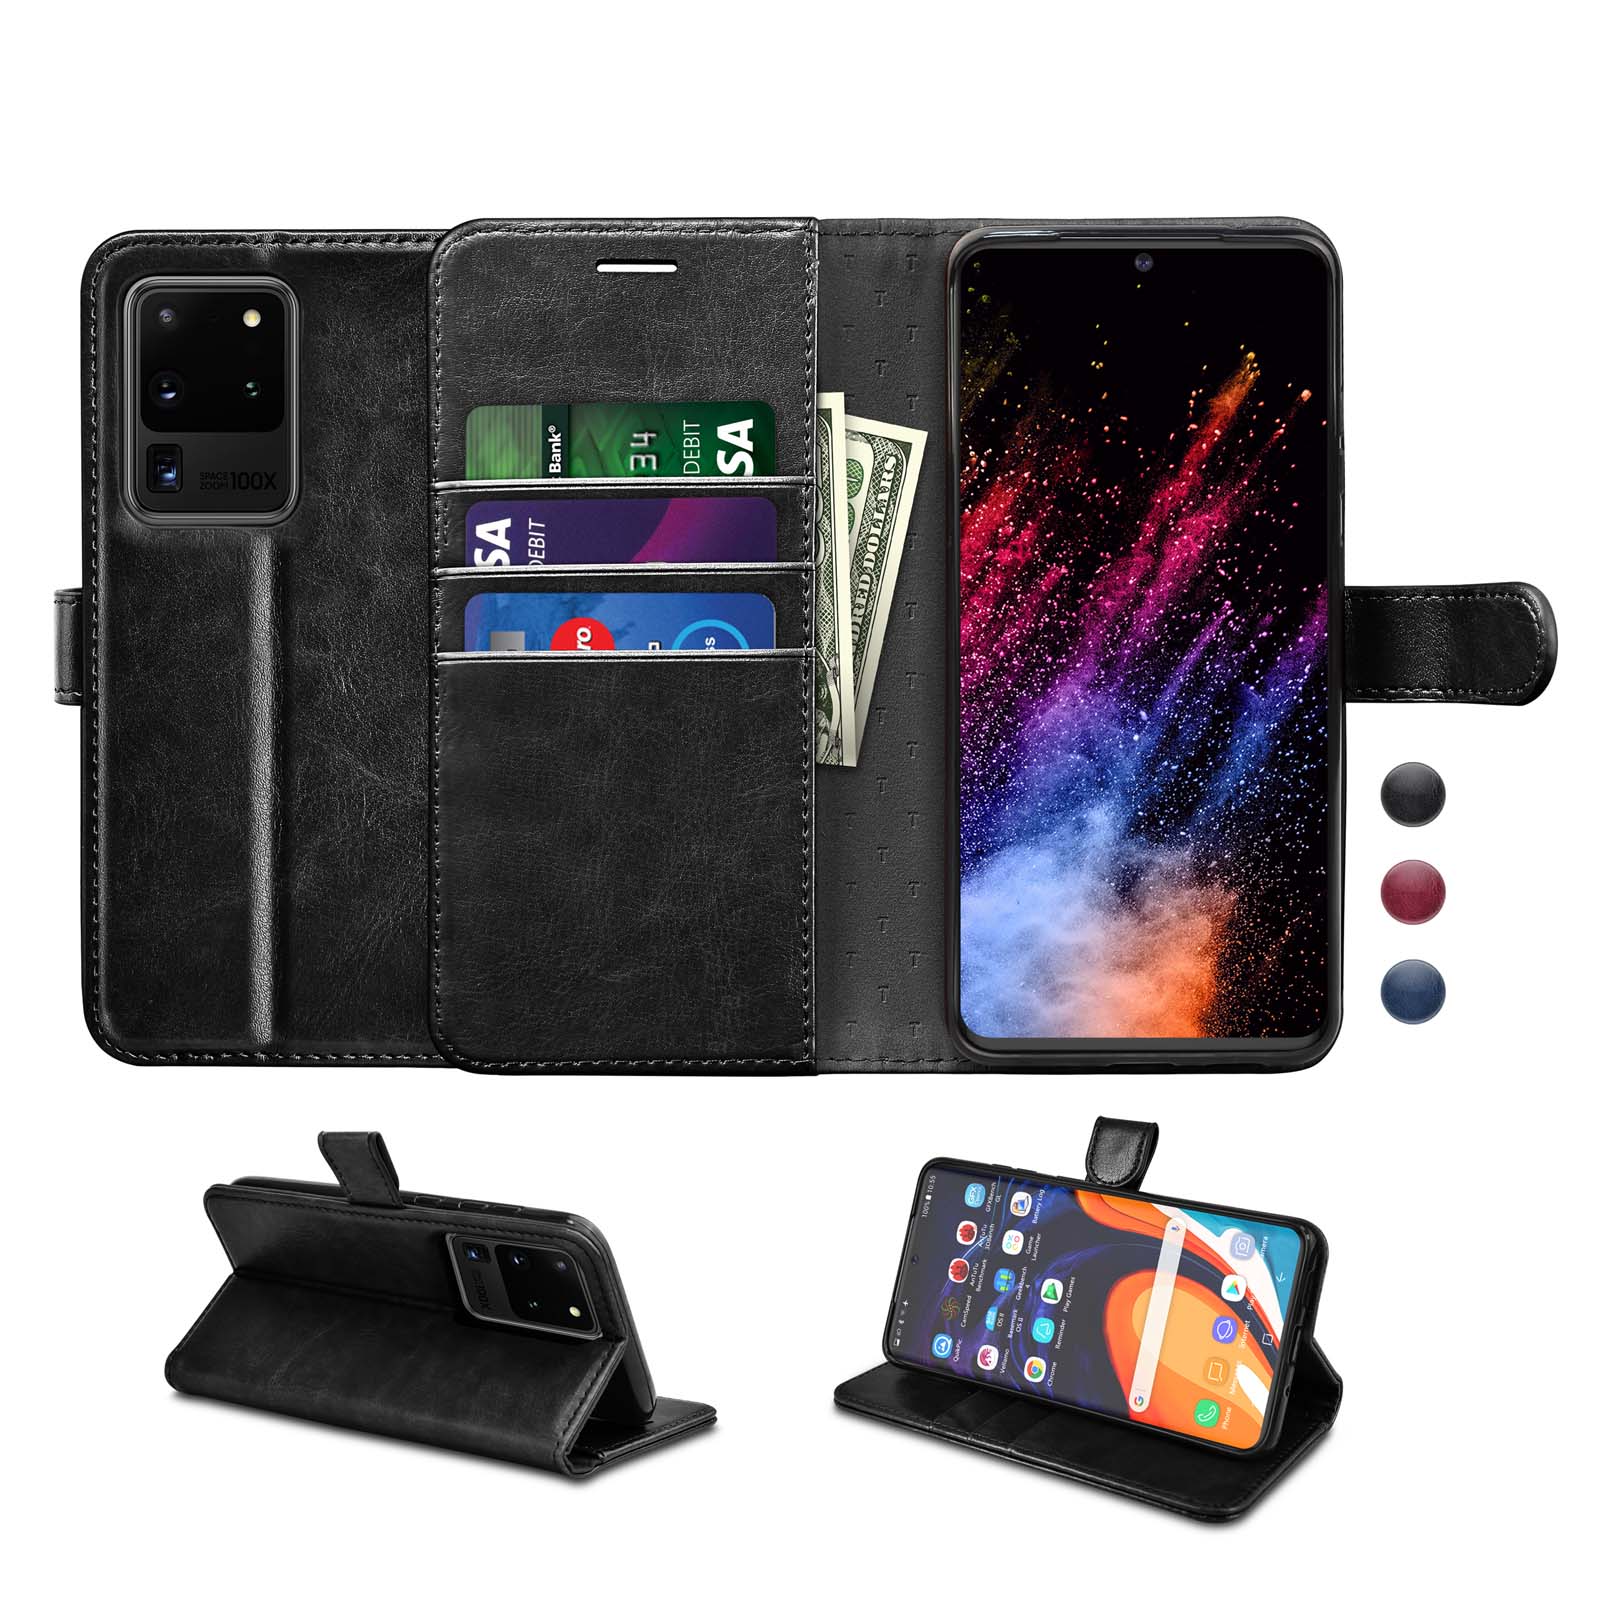 Njjex Case Wallet 2020 Galaxy S20 Ultra S20 S20+ S20 Plus 5G, Galaxy S20 S20 Ultra Wallet Case RFID Blocking Card Slot Stand PU Leather Magnetic Protect Flip Cover [Gift Box] -Black - image 1 of 10